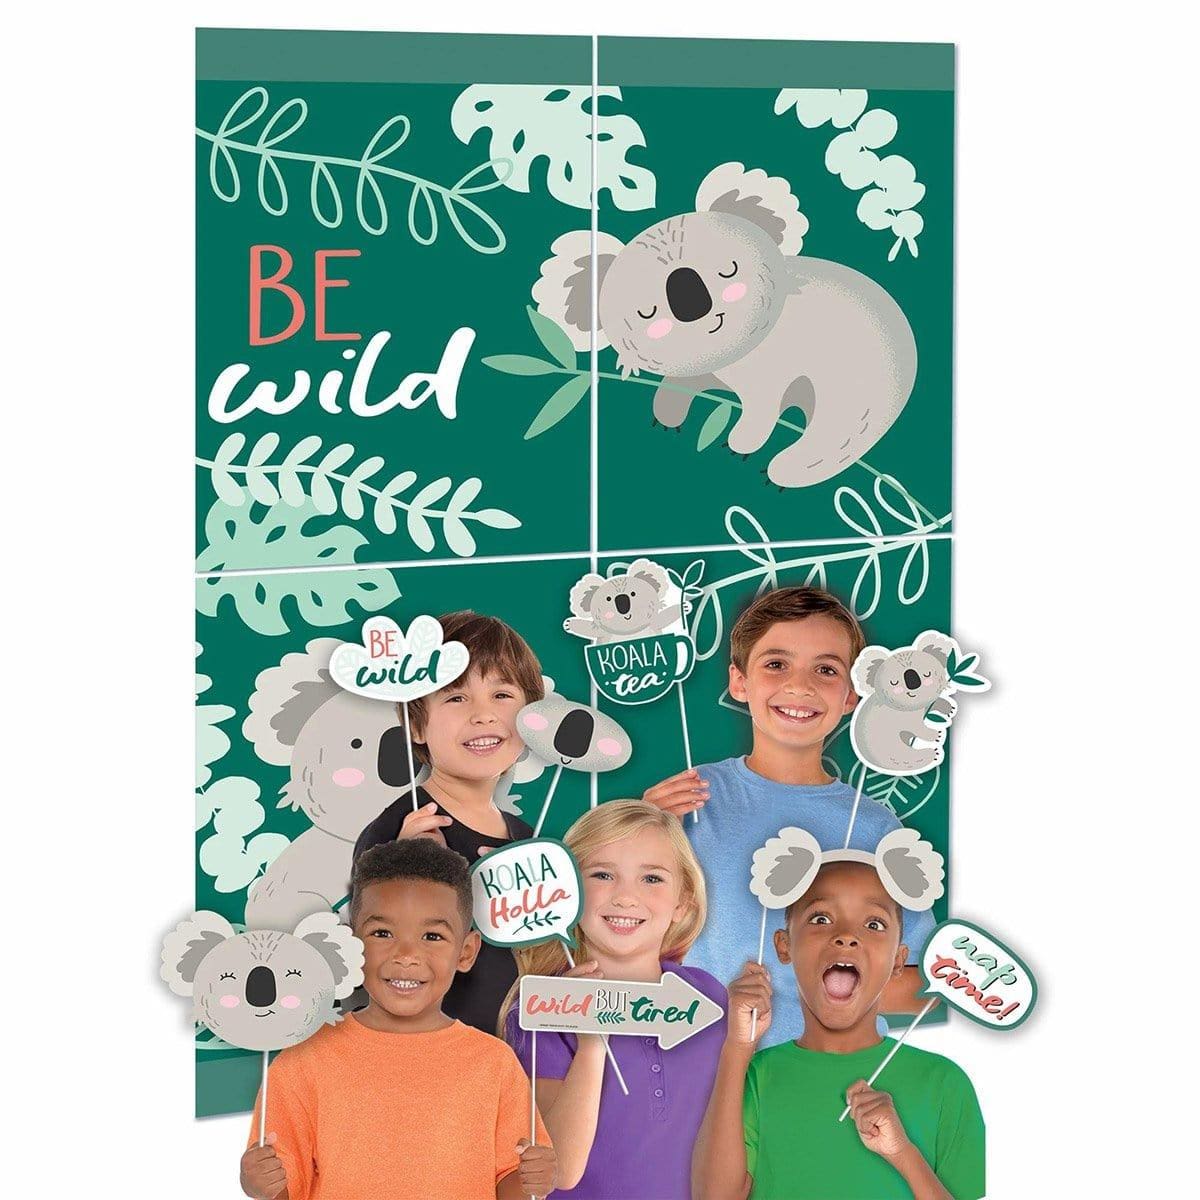 Buy Kids Birthday Koala Party Scene Setter with photo Props sold at Party Expert